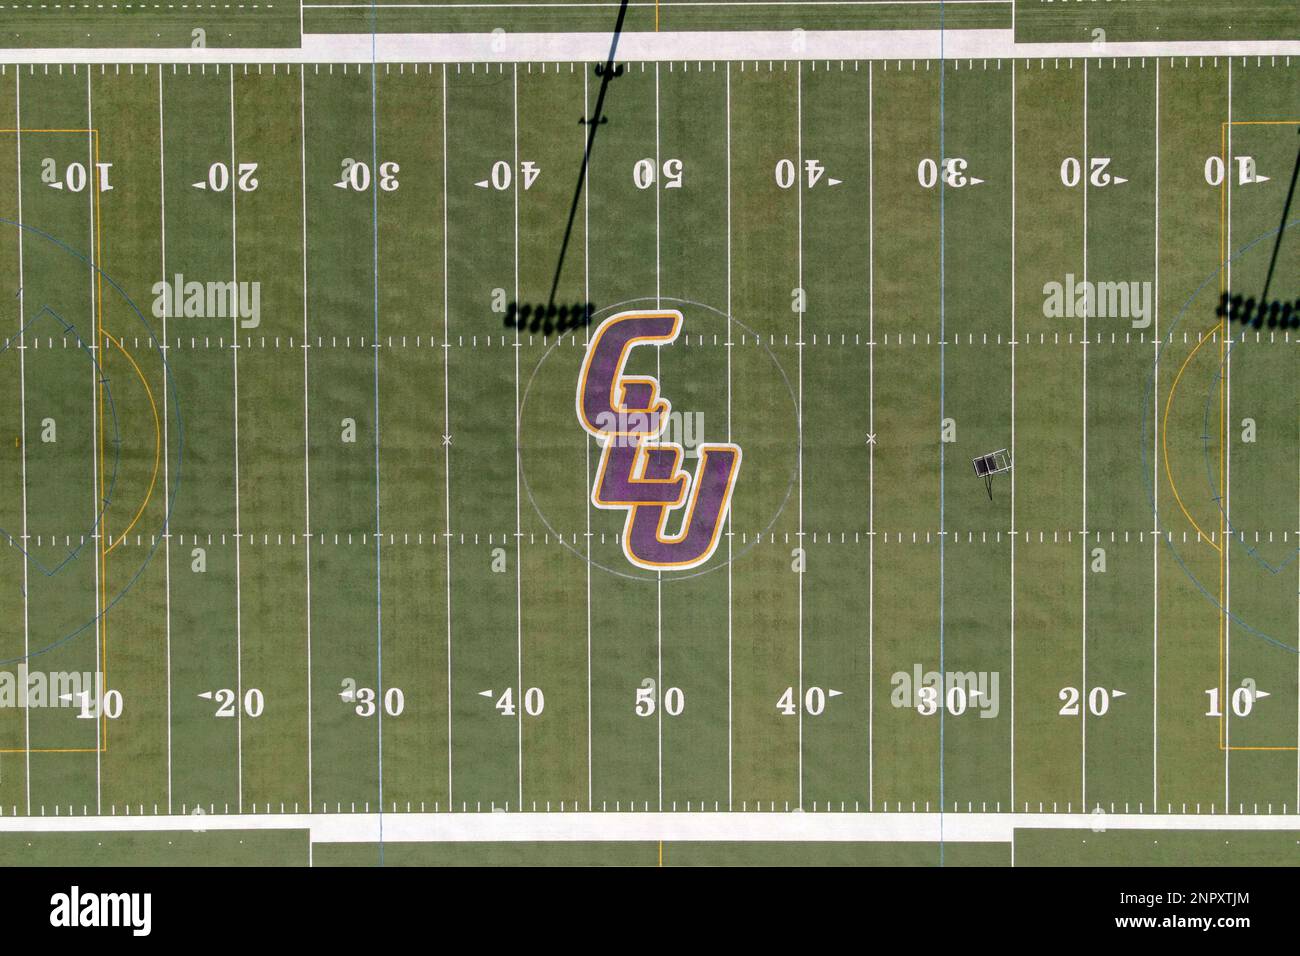 https://c8.alamy.com/comp/2NPXTJM/a-general-view-of-the-clu-logo-at-midfield-of-william-rolland-stadium-and-gallery-of-fine-art-on-the-campus-of-cal-lutheran-amid-the-global-coronvirus-covid-19-pandemic-saturday-june-20-2020-in-thousand-oaks-calif-the-facility-completed-in-fall-2011-has-2000-fixed-seats-an-artificial-turf-field-and-outdoor-sports-lighting-for-football-soccer-and-intramural-matcheskirby-lee-via-ap-2NPXTJM.jpg